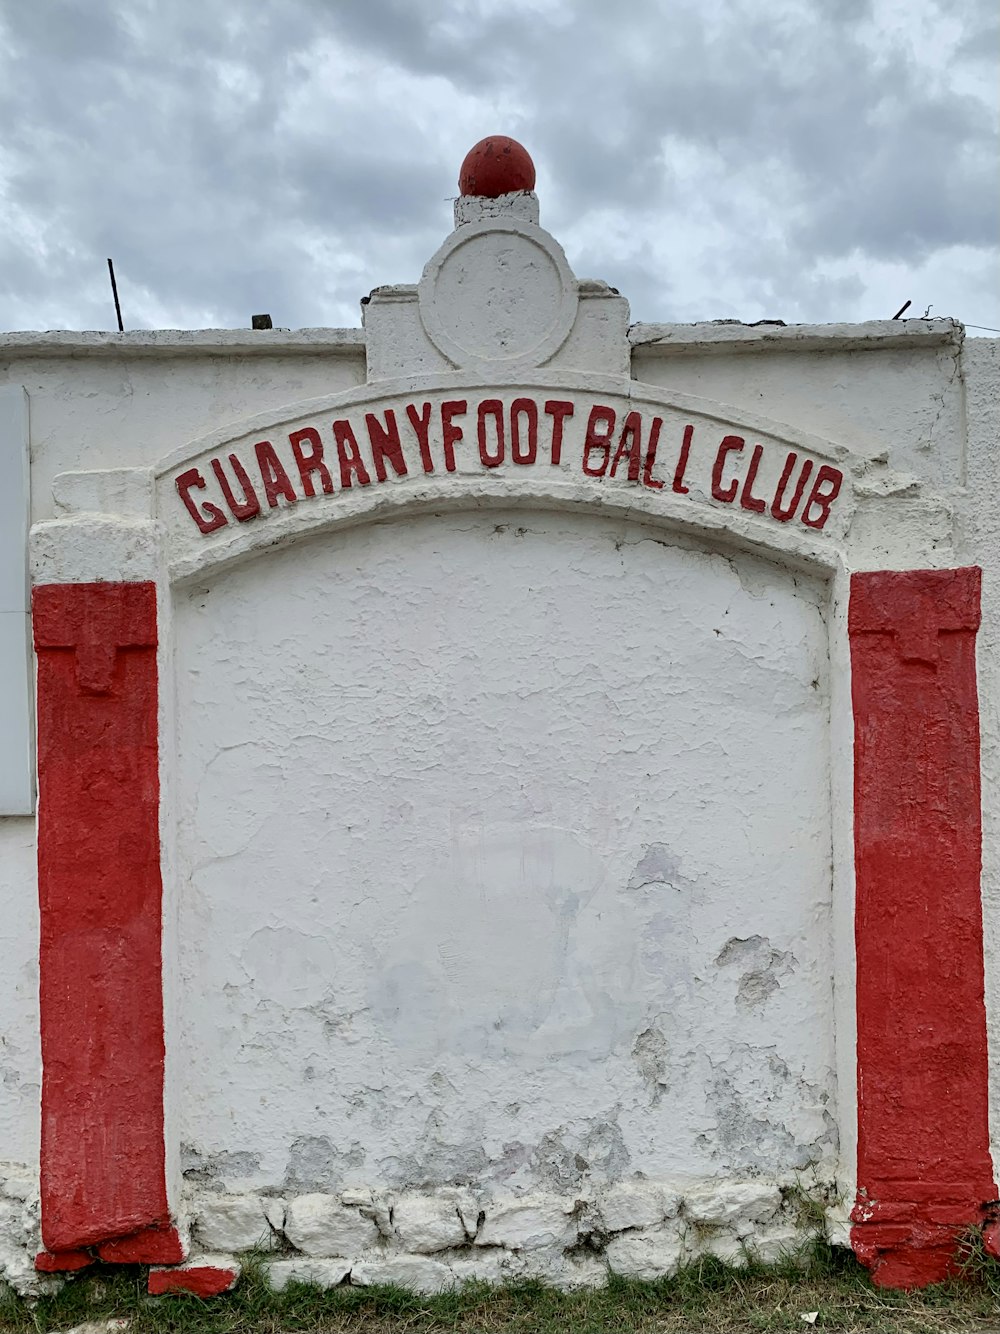 a red and white building with a red and white sign